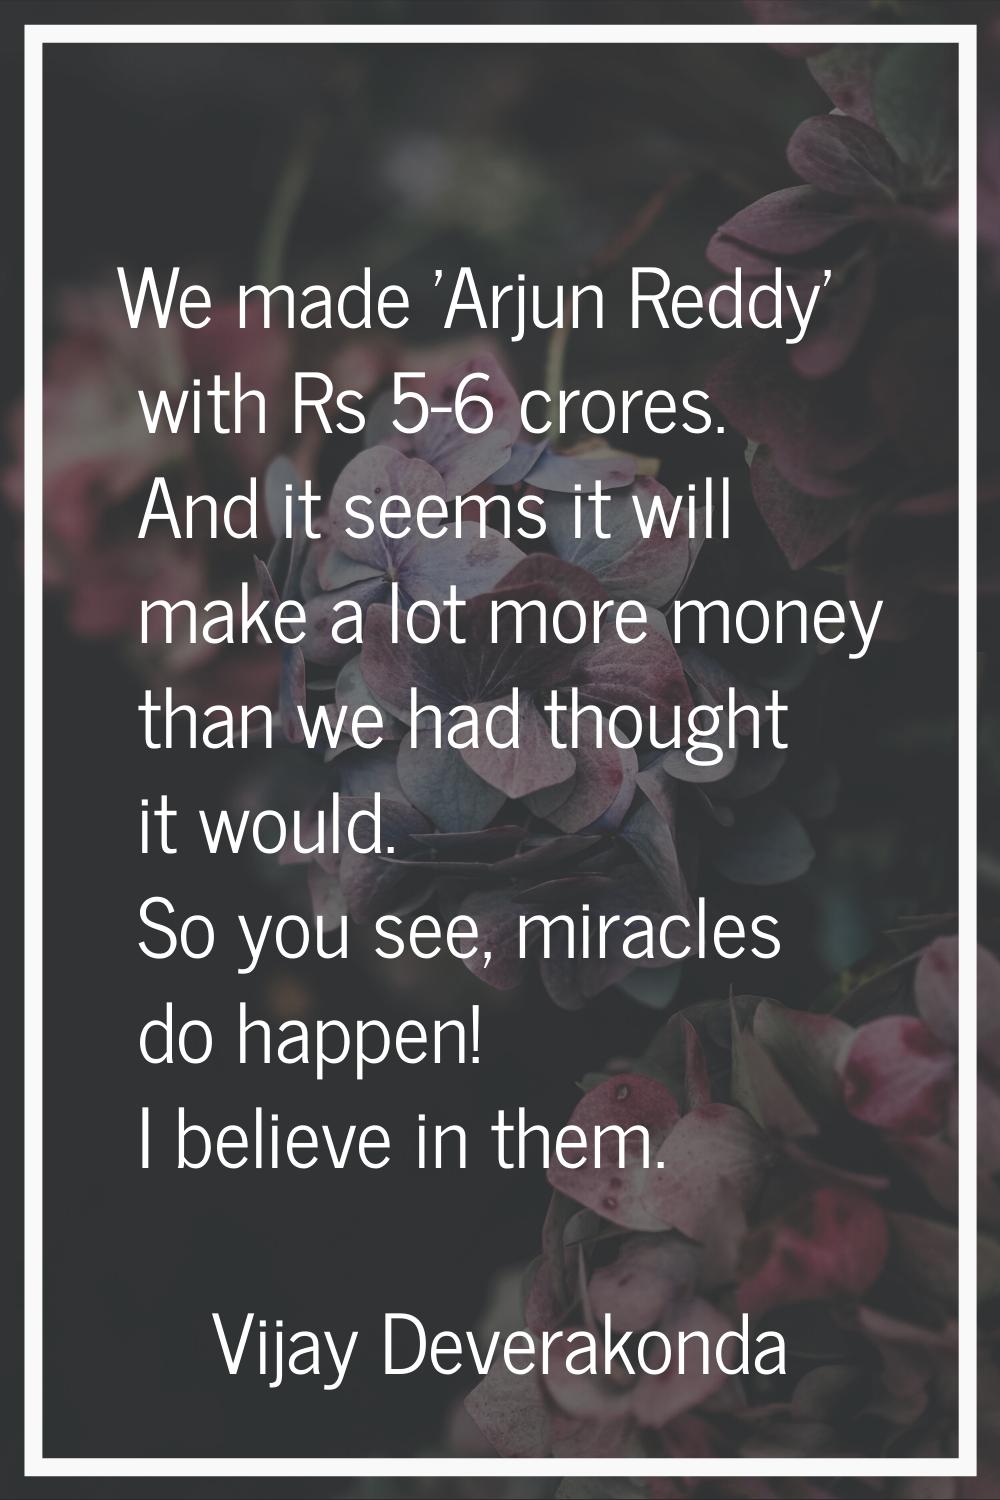 We made 'Arjun Reddy' with Rs 5-6 crores. And it seems it will make a lot more money than we had th